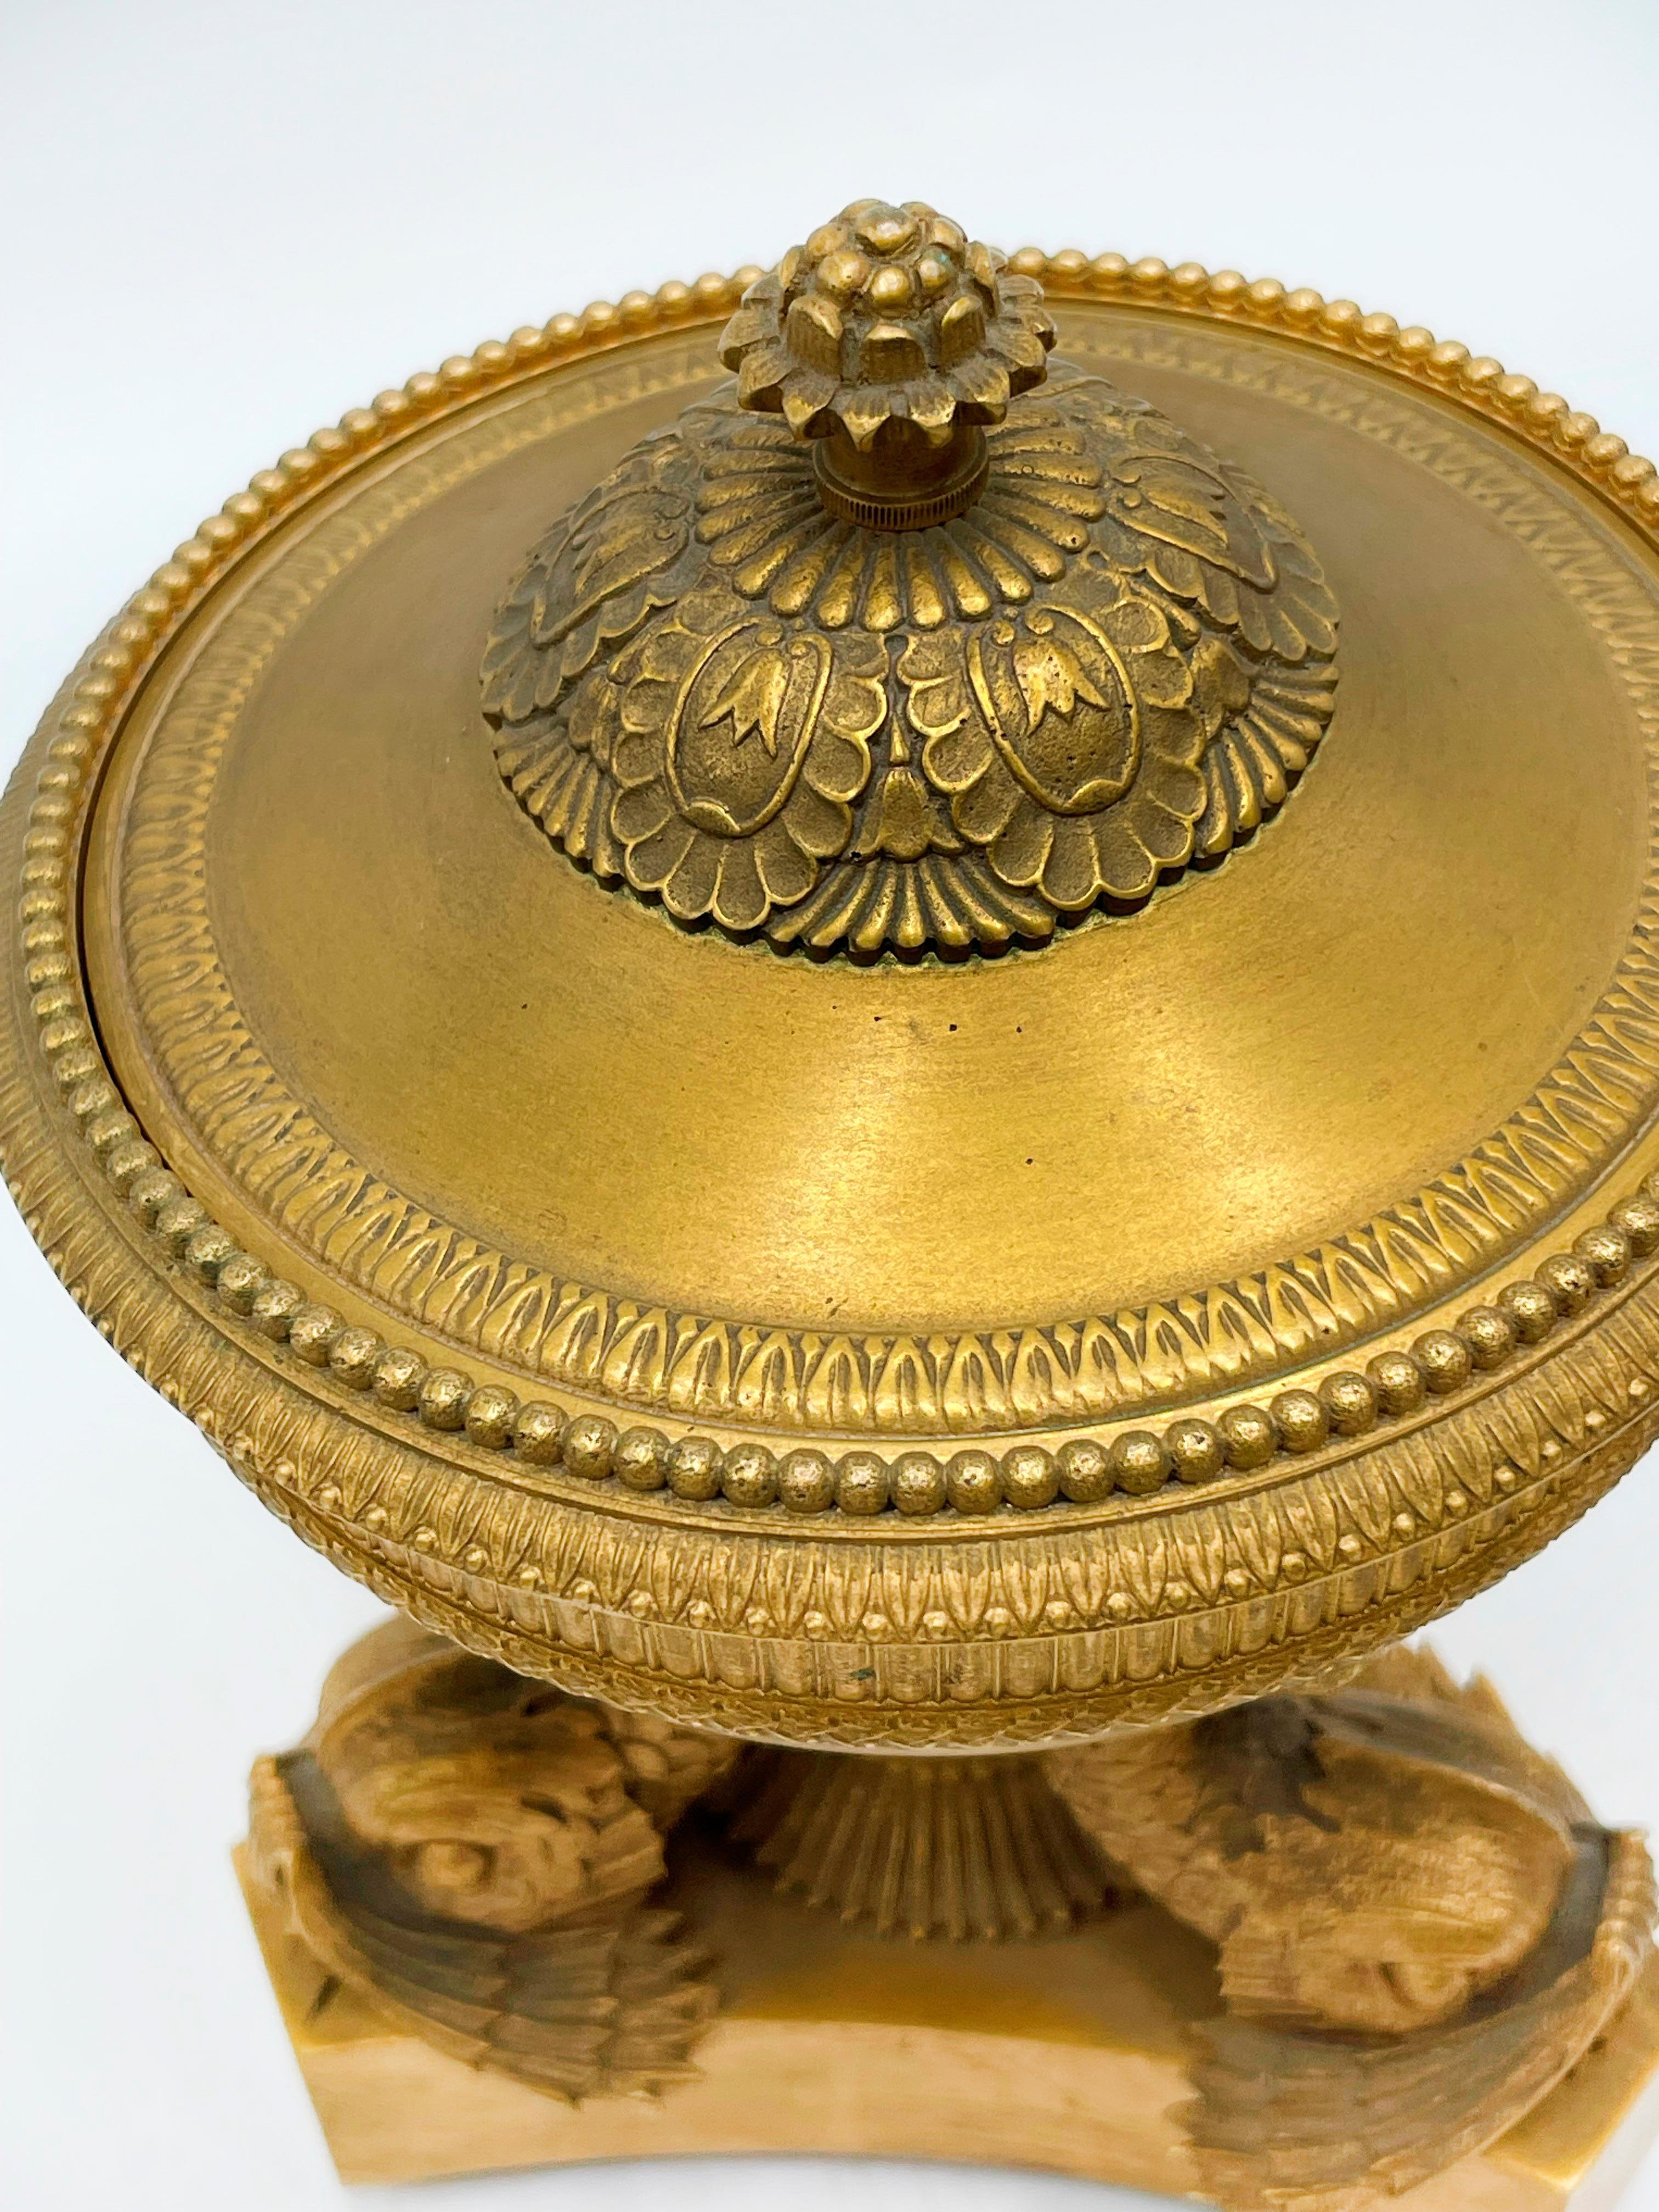 Empire Elegant inkwell with lid in gold-patinated bronze. french empire